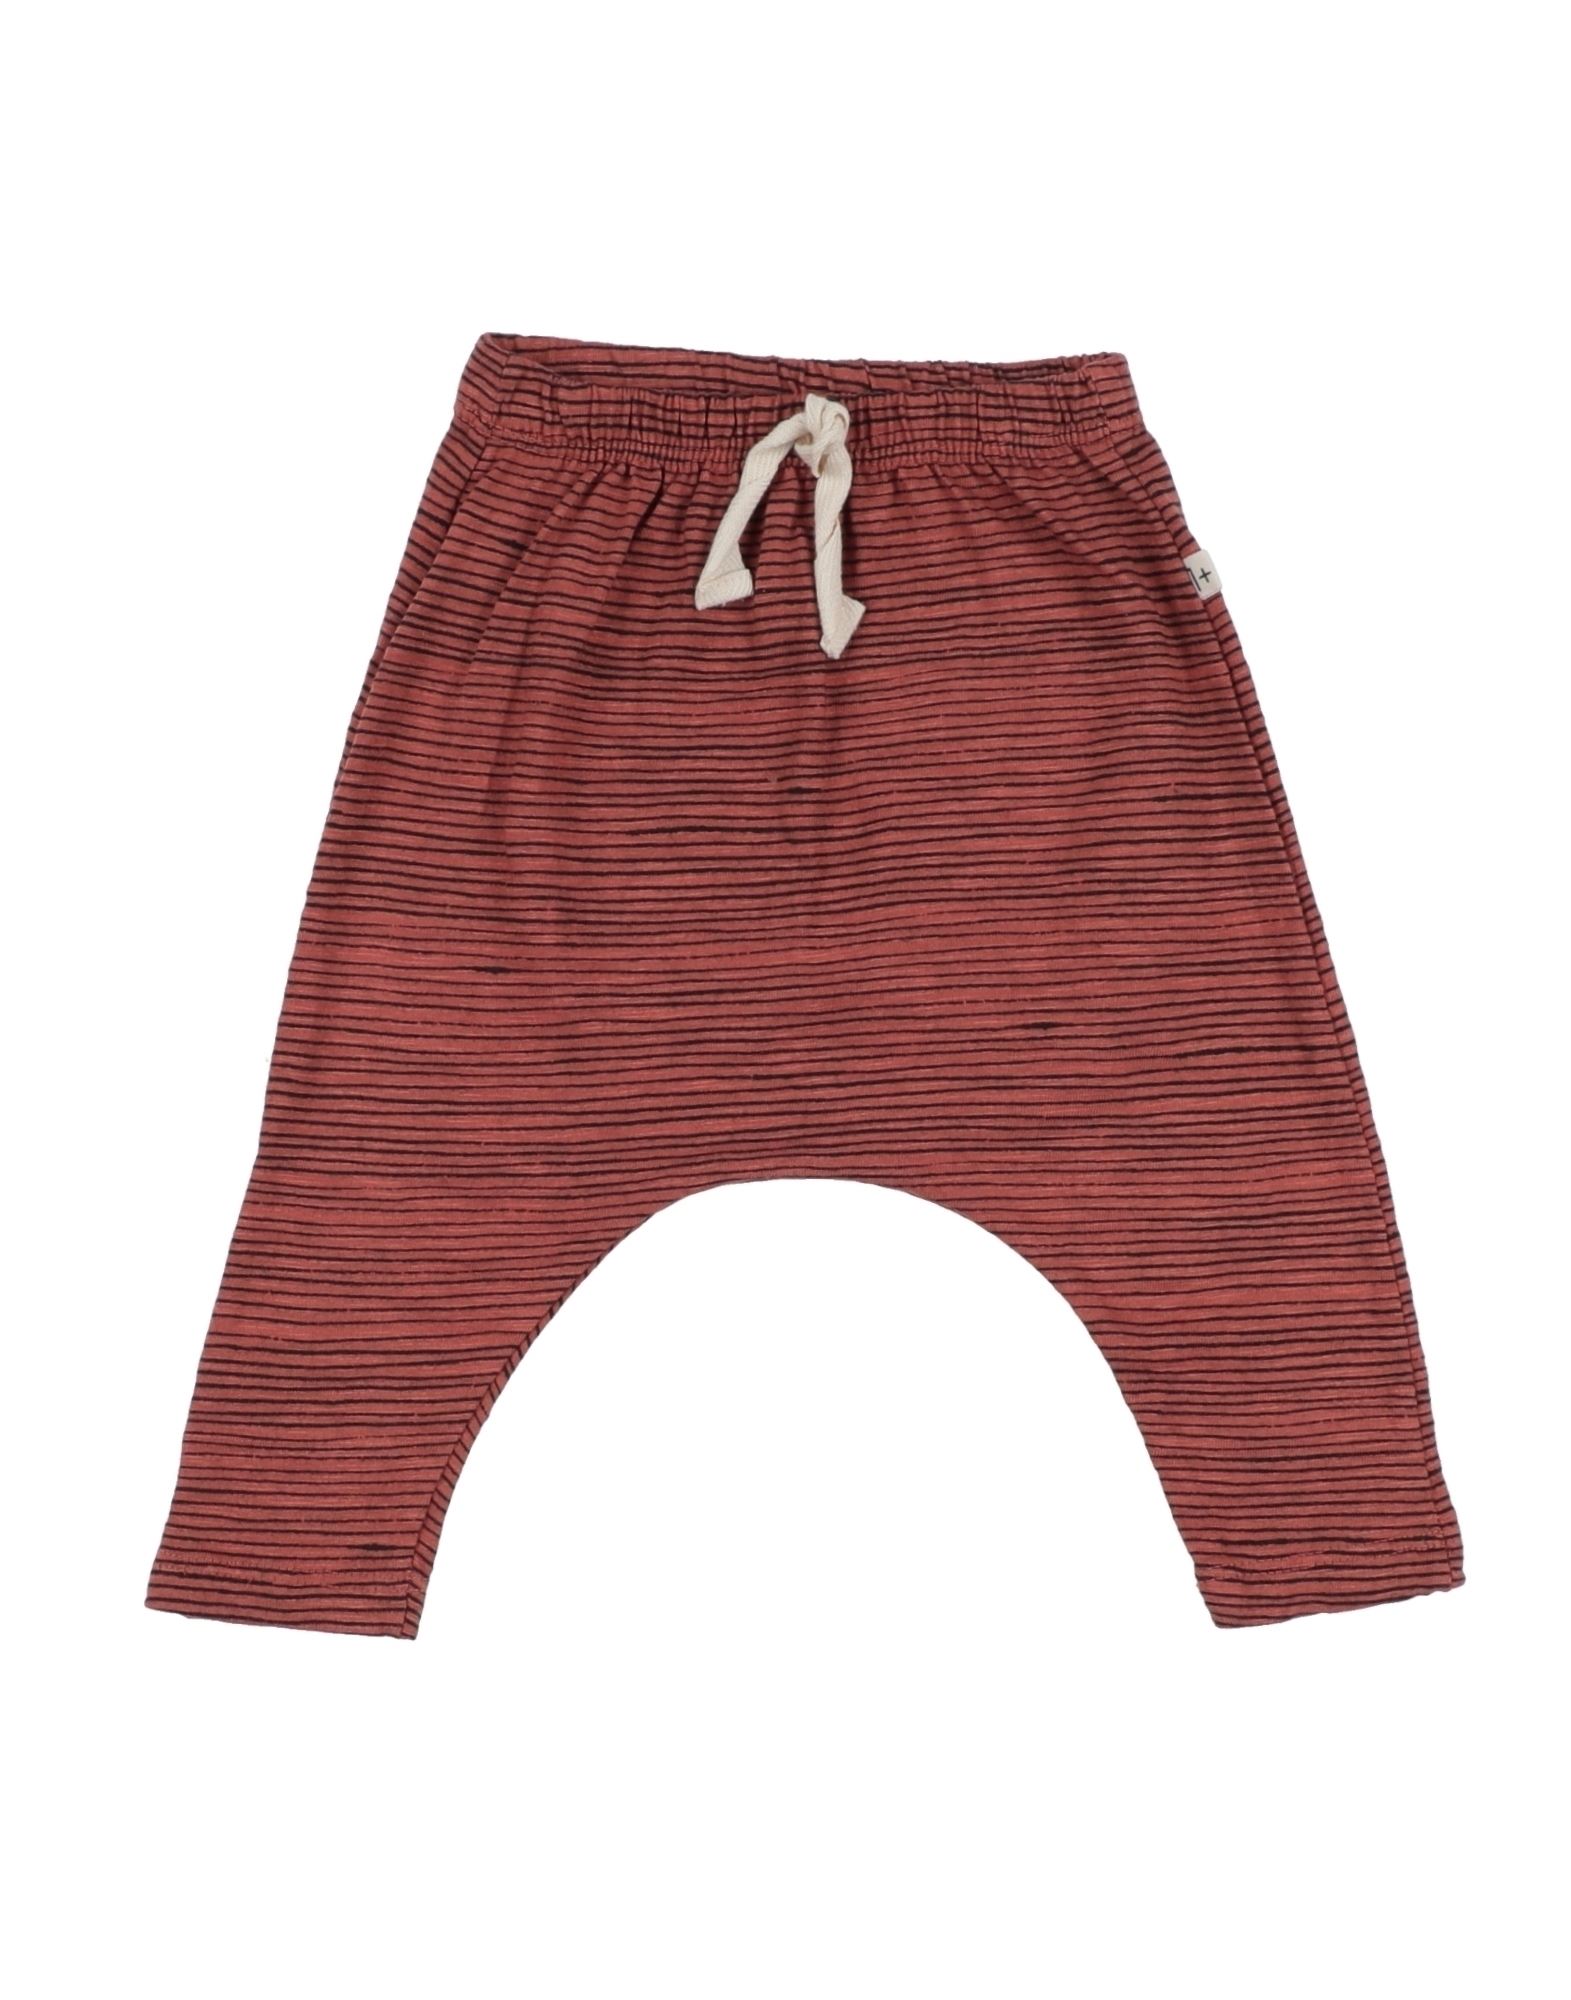 1+ In The Family Kids' 1 + In The Family Newborn Boy Pants Brick Red Size 3 Cotton, Elastane